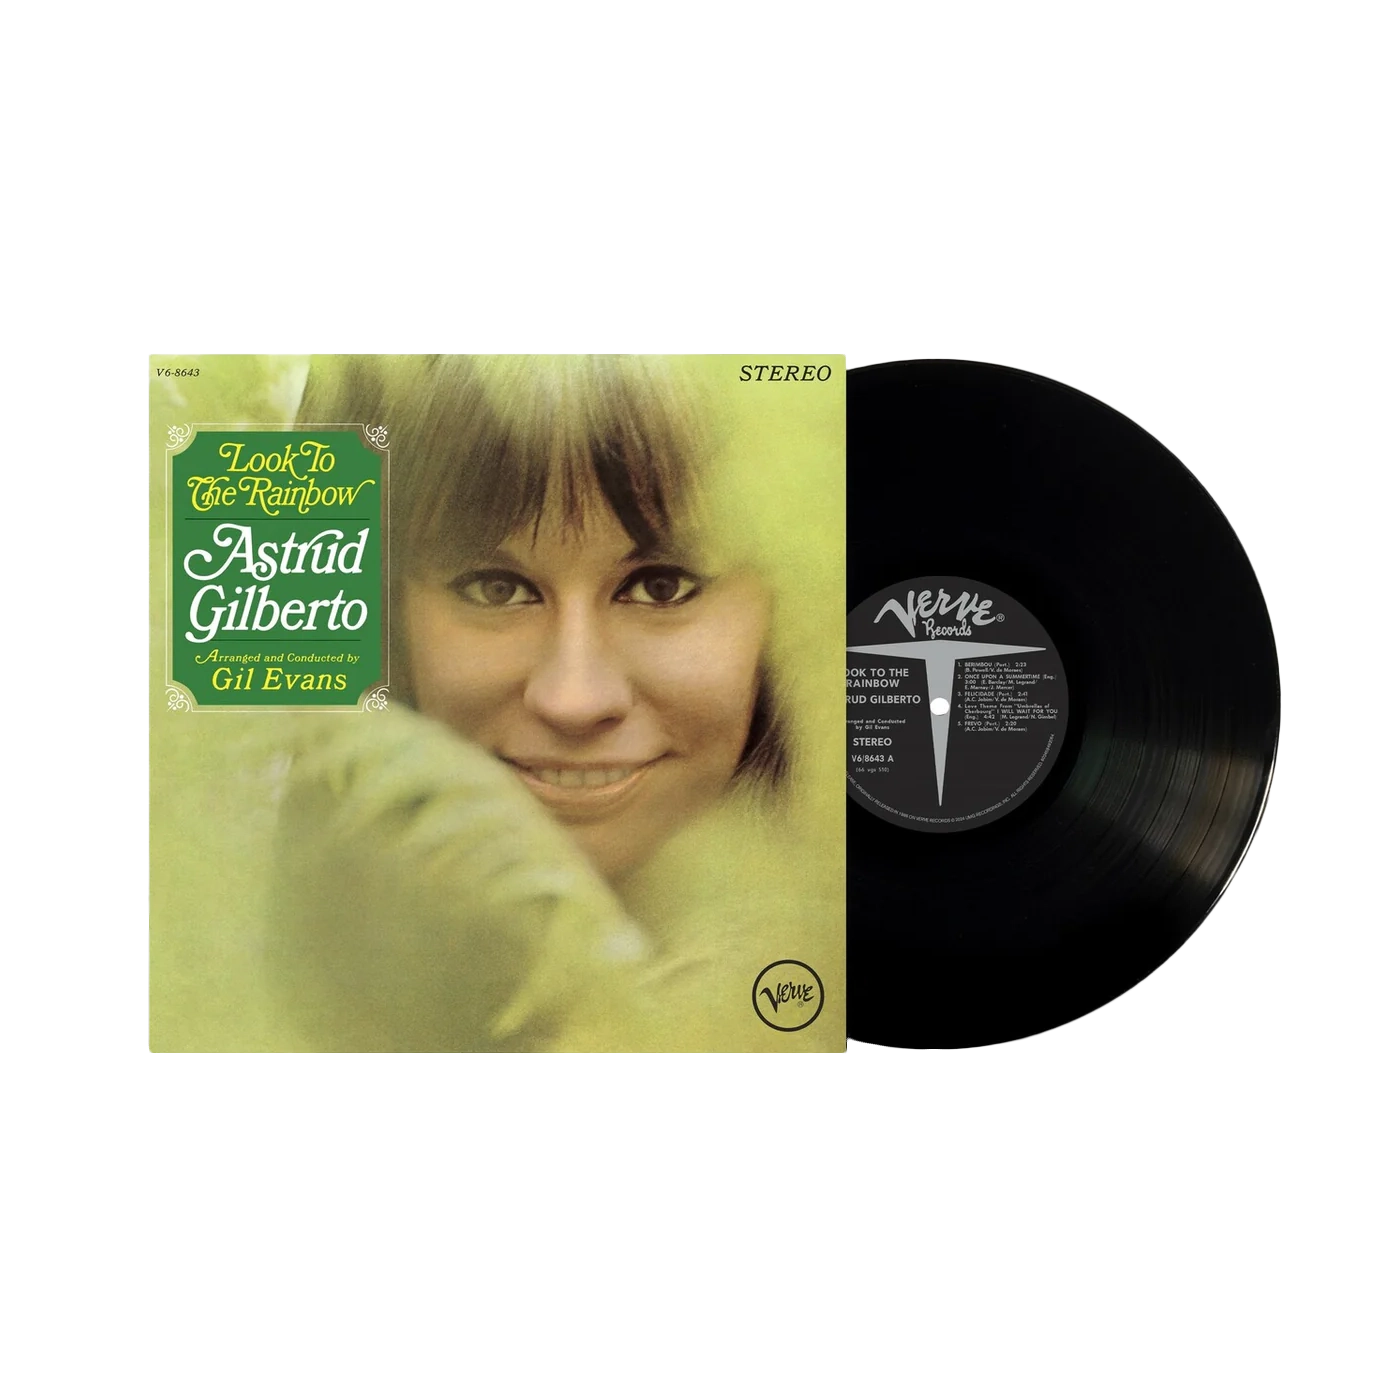 Astrud Gilberto - Look To The Rainbow (Verve By Request): Vinyl LP